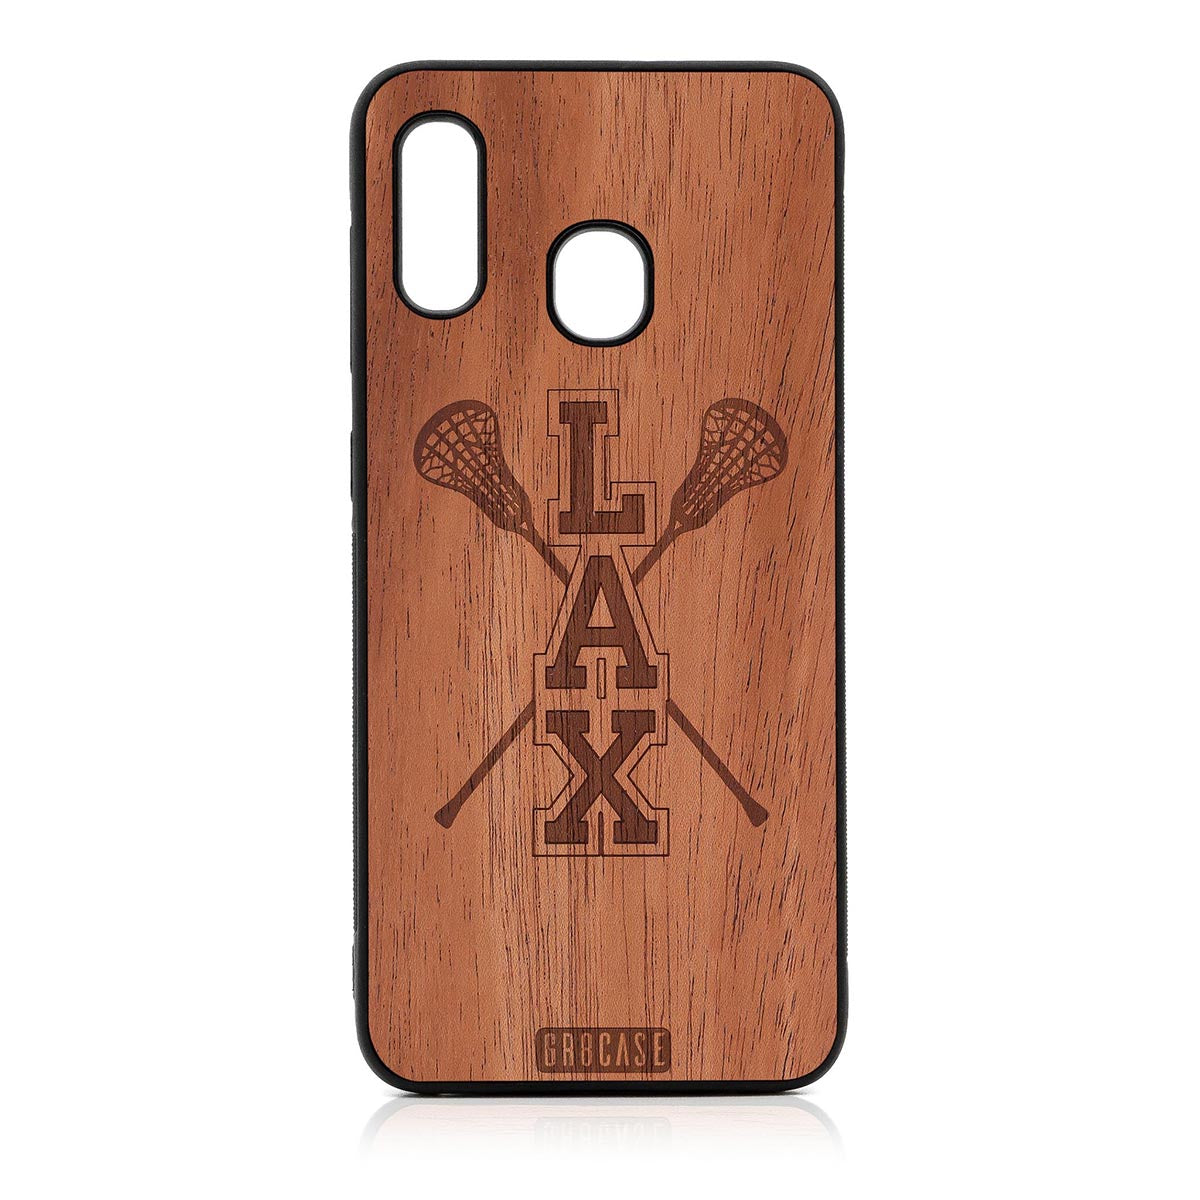 Lacrosse (LAX) Sticks Design Wood Case For Samsung Galaxy A20 by GR8CASE